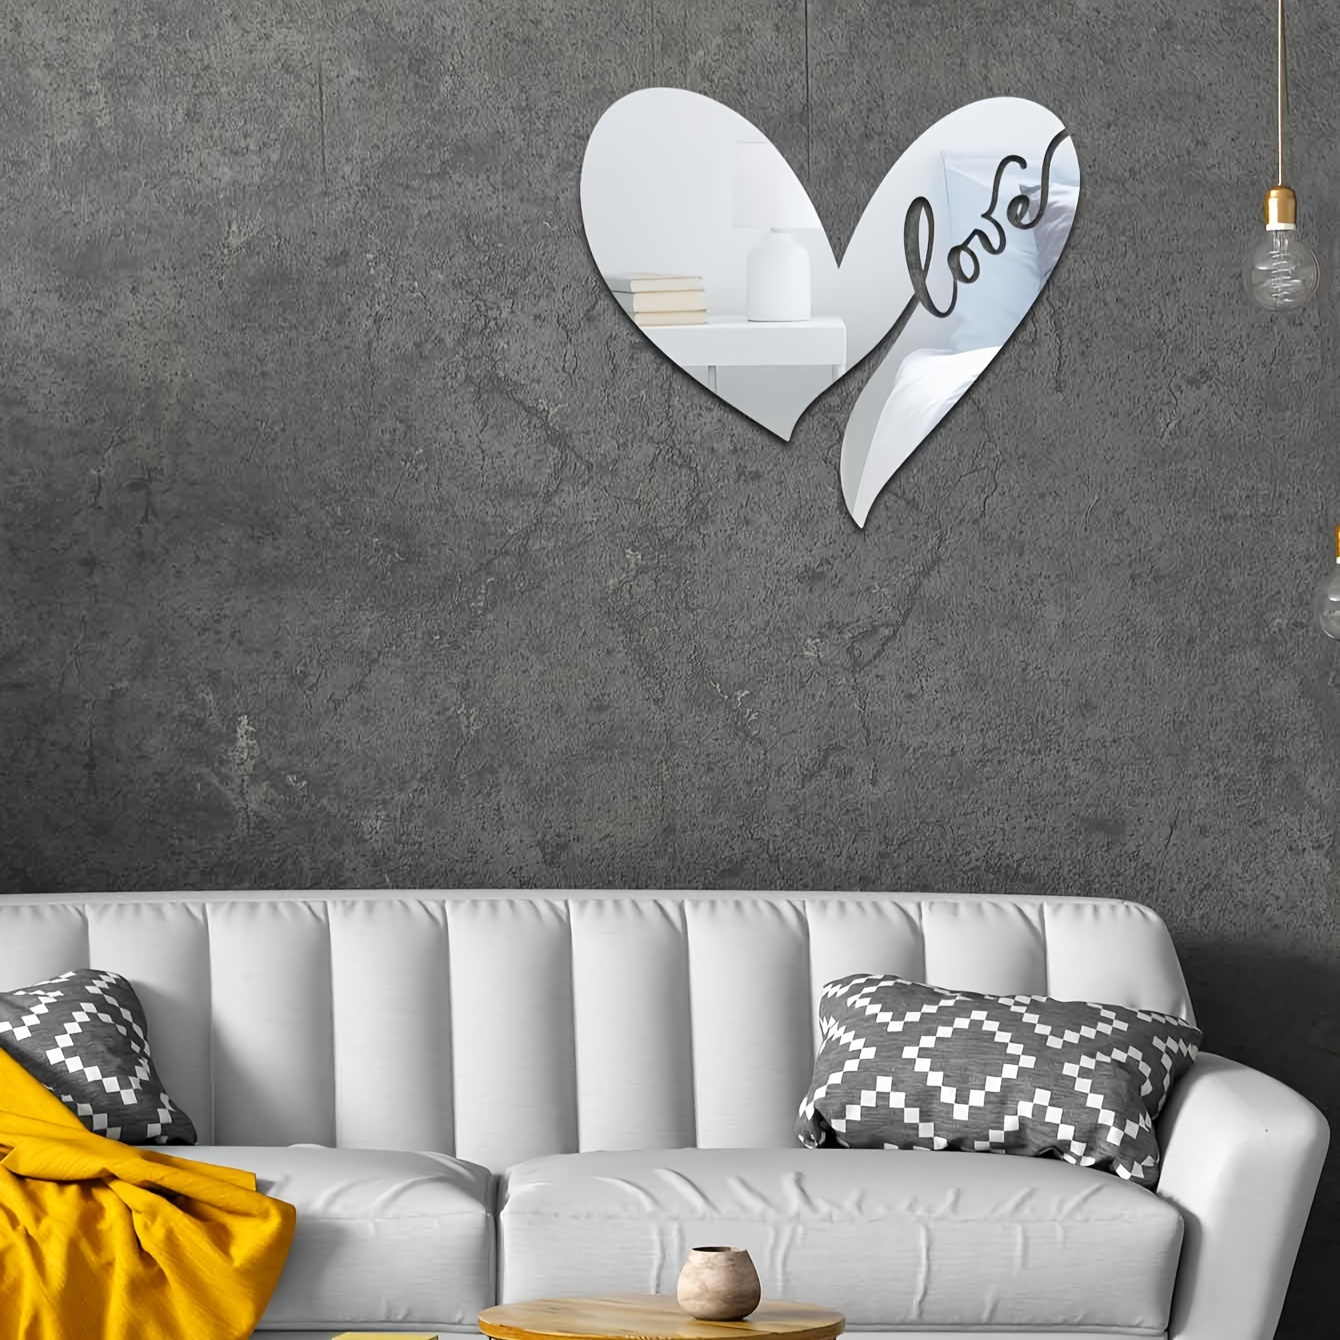 Acrylic Mirror Heart Wall Decals 3D Creative Heart Shape Mirror Heart Wall  Decals DIY Room Decorative Decal Heart Mirrors From Esw_house, $1.23